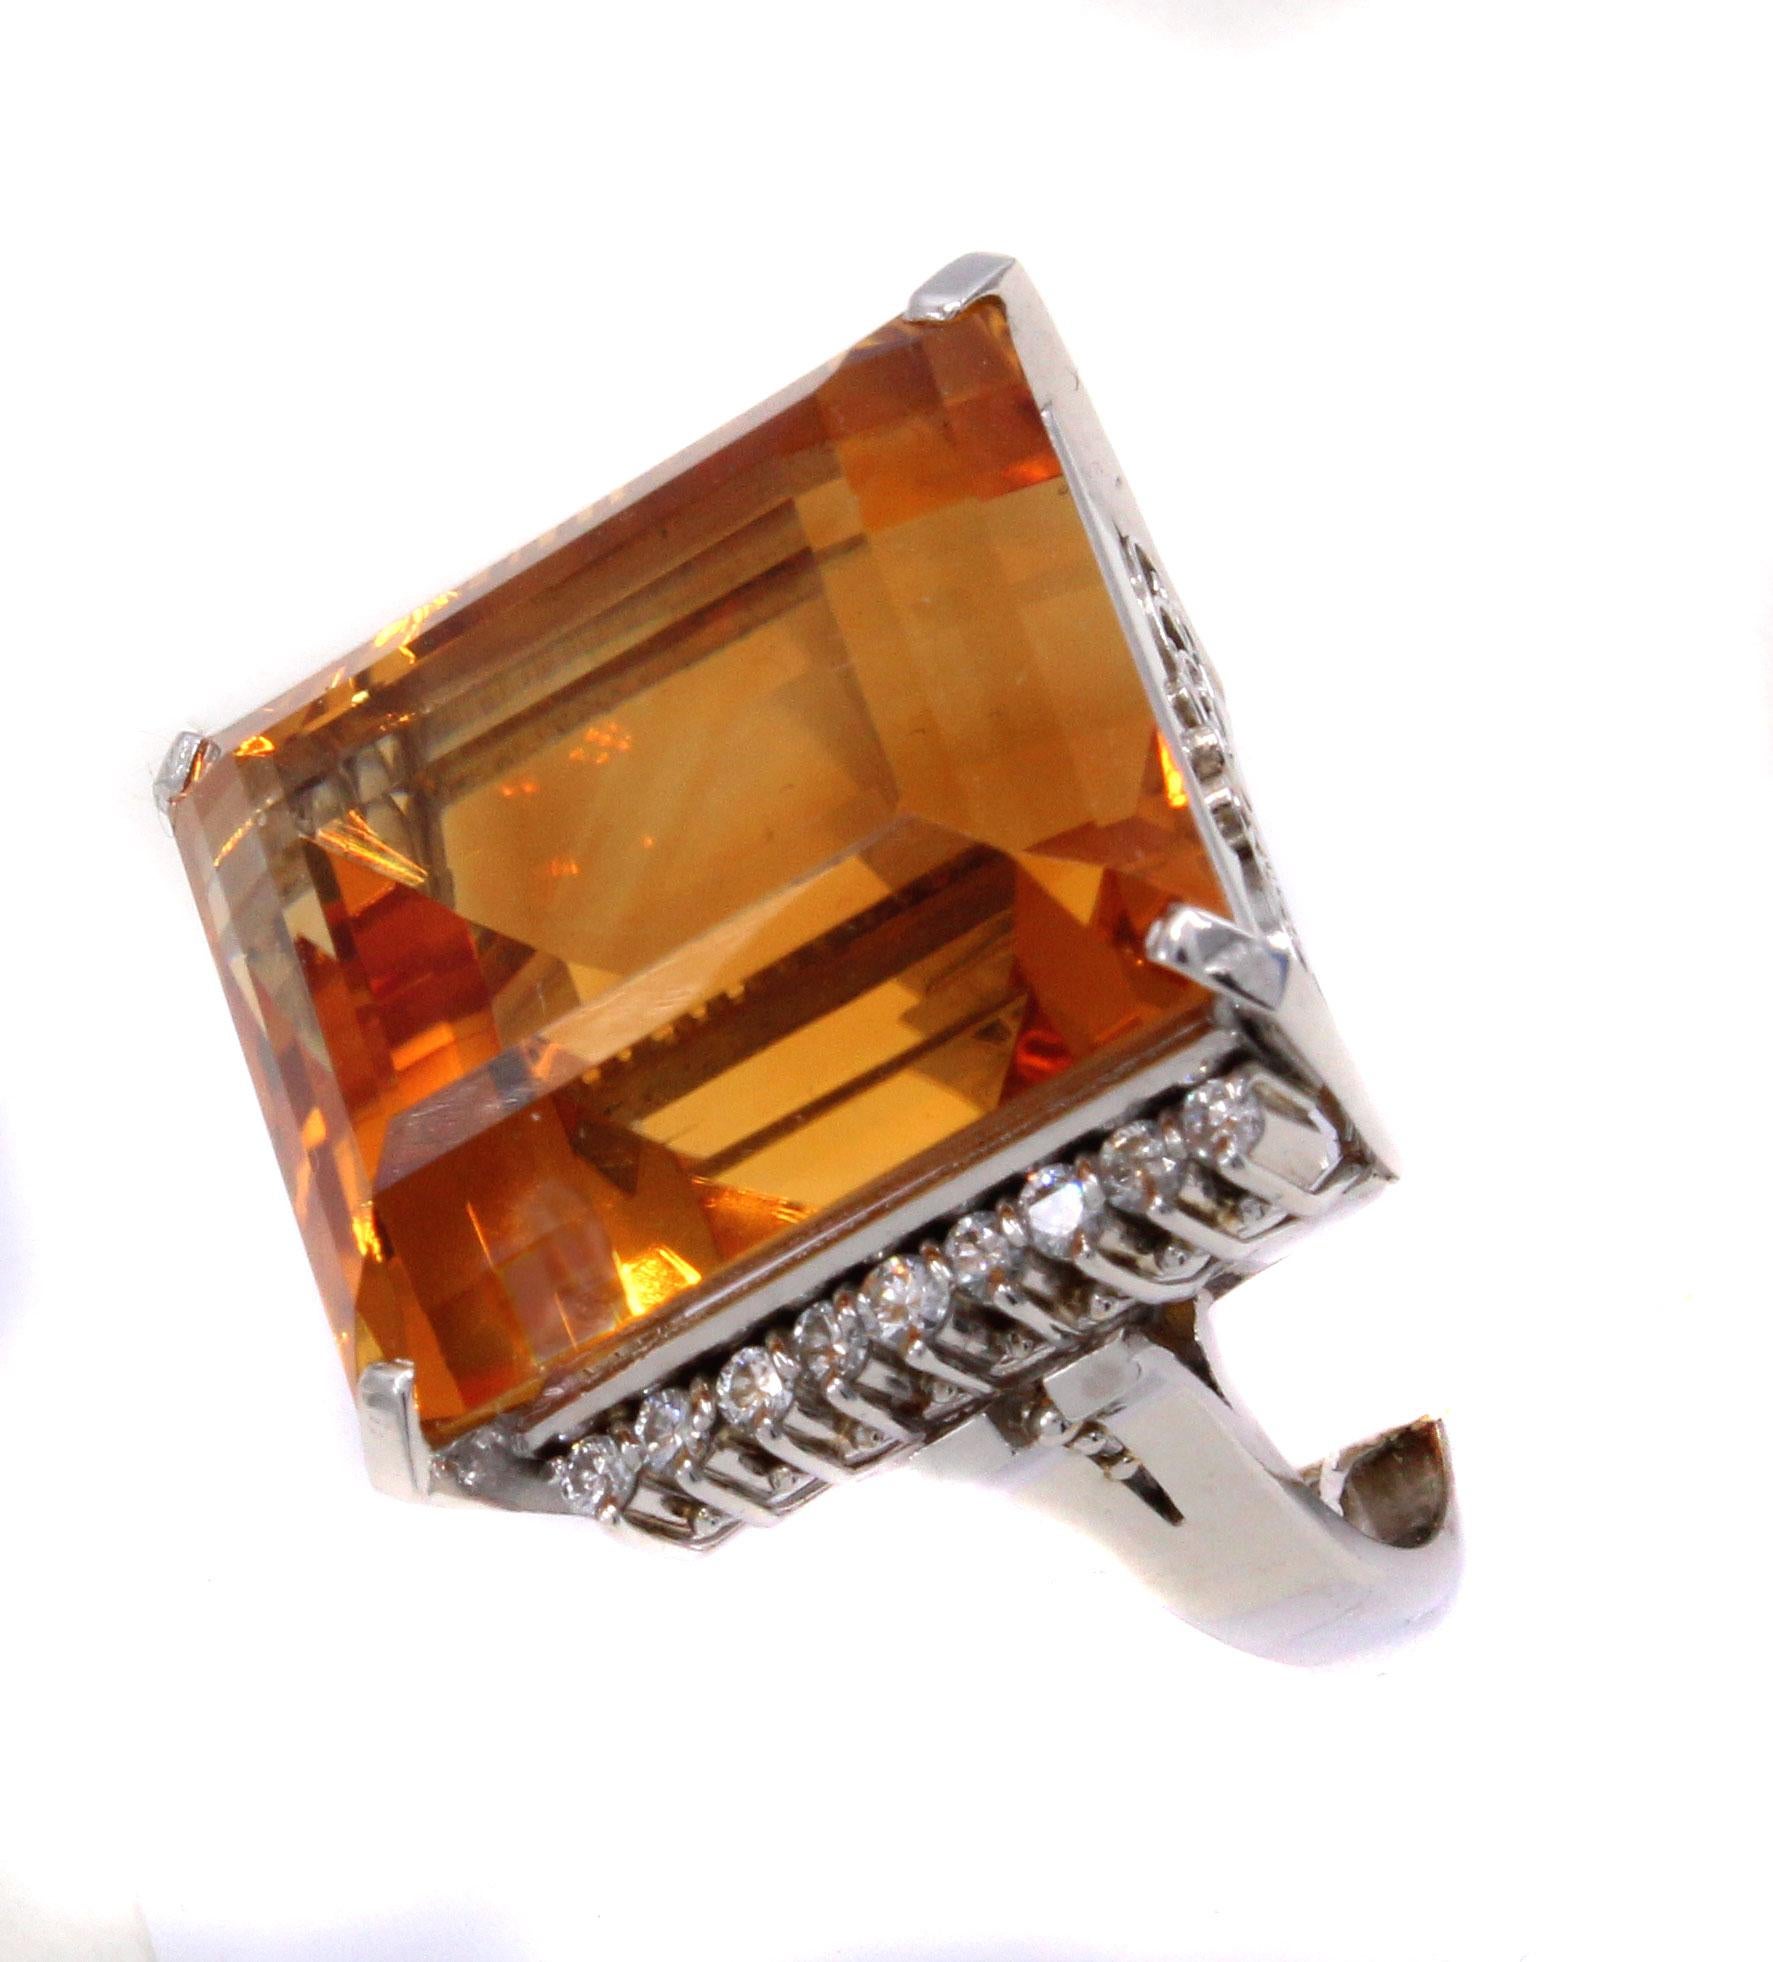 This bold and unique ring from the 1960s features a gem emerald cut Golden Citrine measured to weigh approximately 37.50 carats. The Citrine exhibits an amazing saturation of color and the perfect cut brings out an incredible amount of fire and